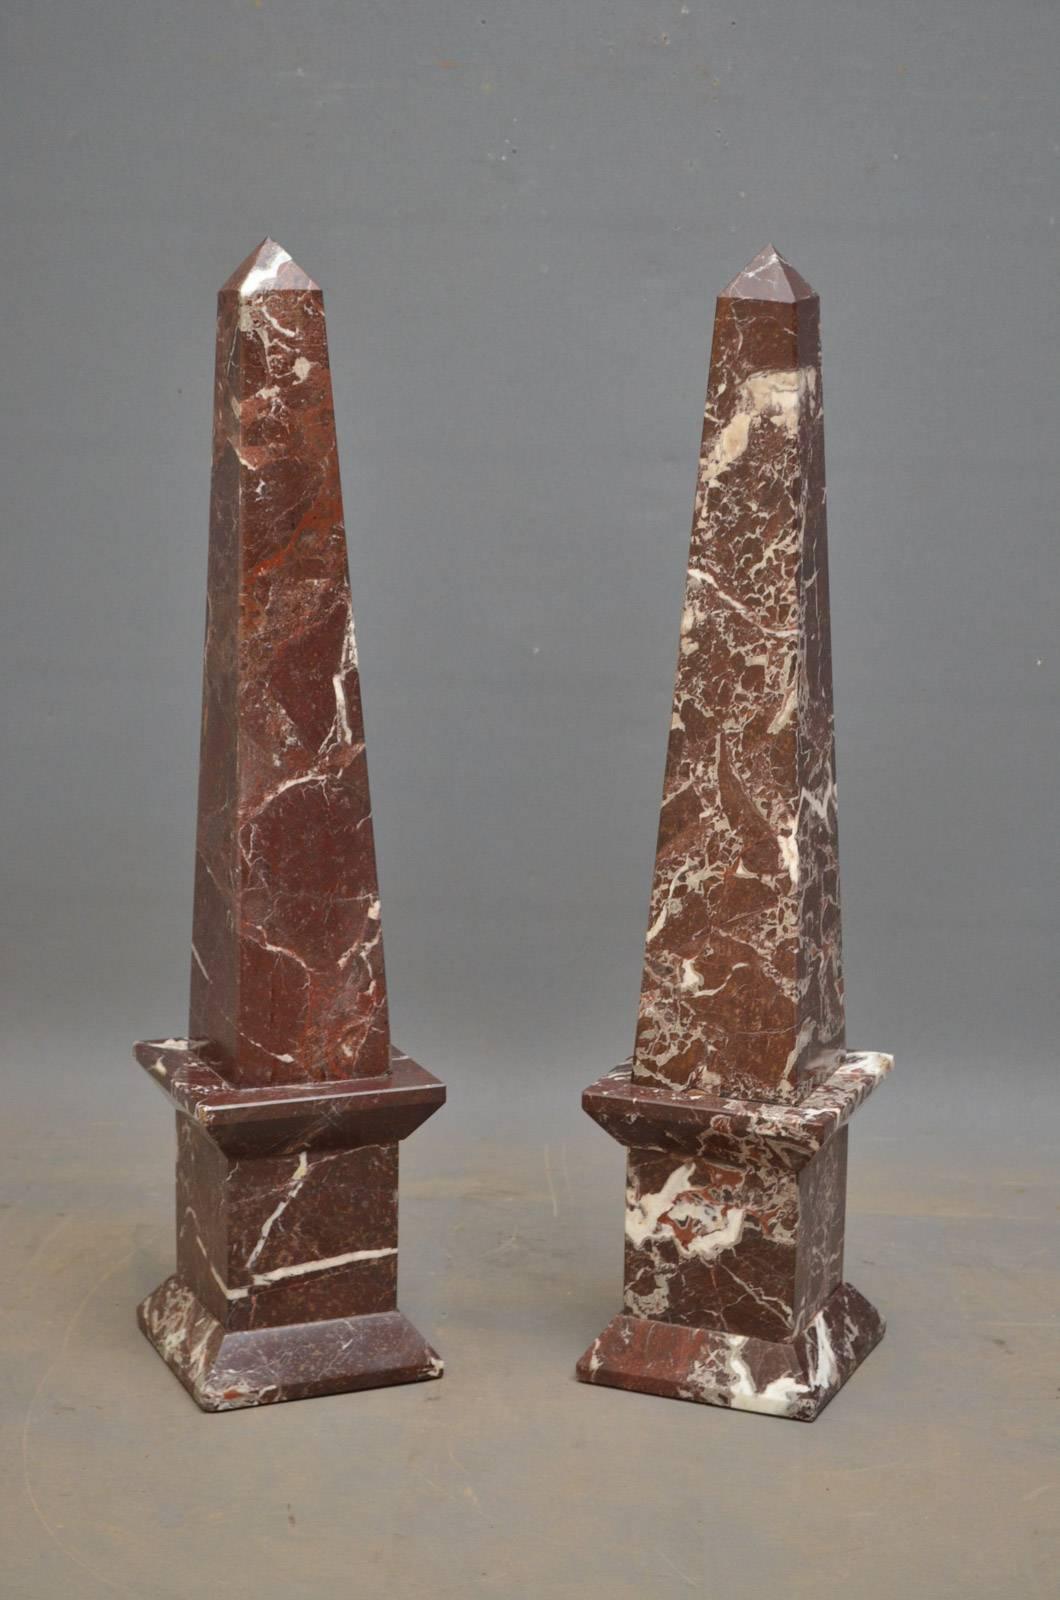 Sn4275  a fine pair of very decorative rogue marble obelisks in wonderful condition throughout. Early to mid-20th century.
Measures: H 29.5